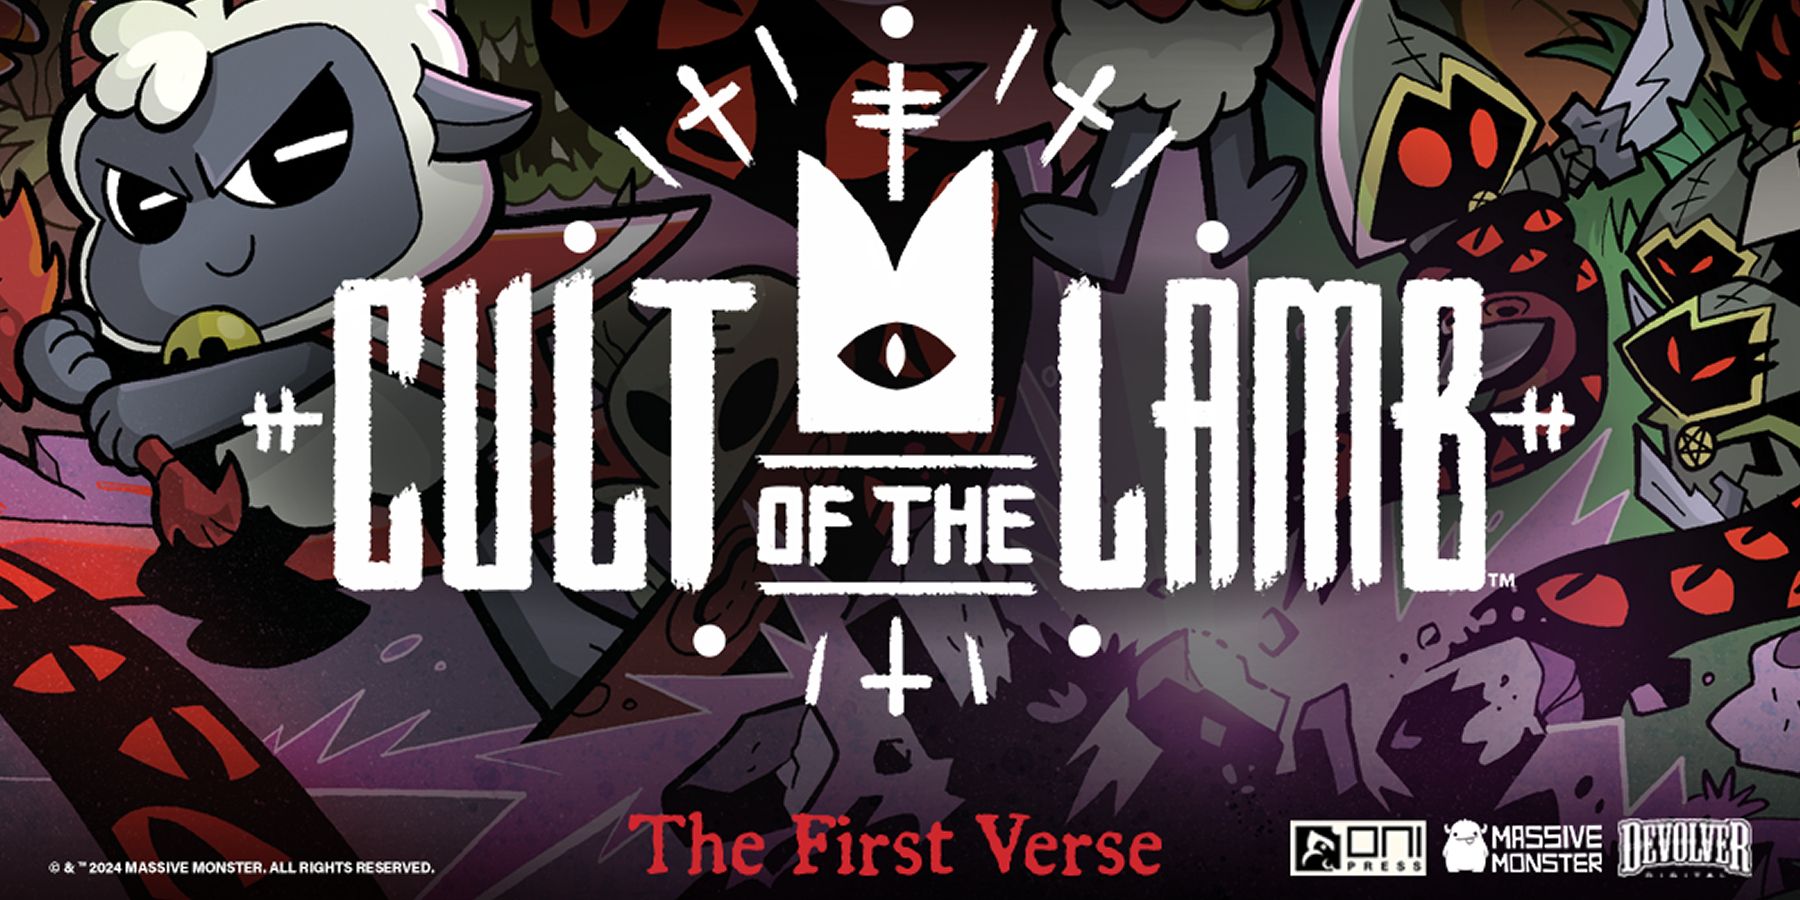 cult-of-the-lamb-the-first-verse-comic-header-approved